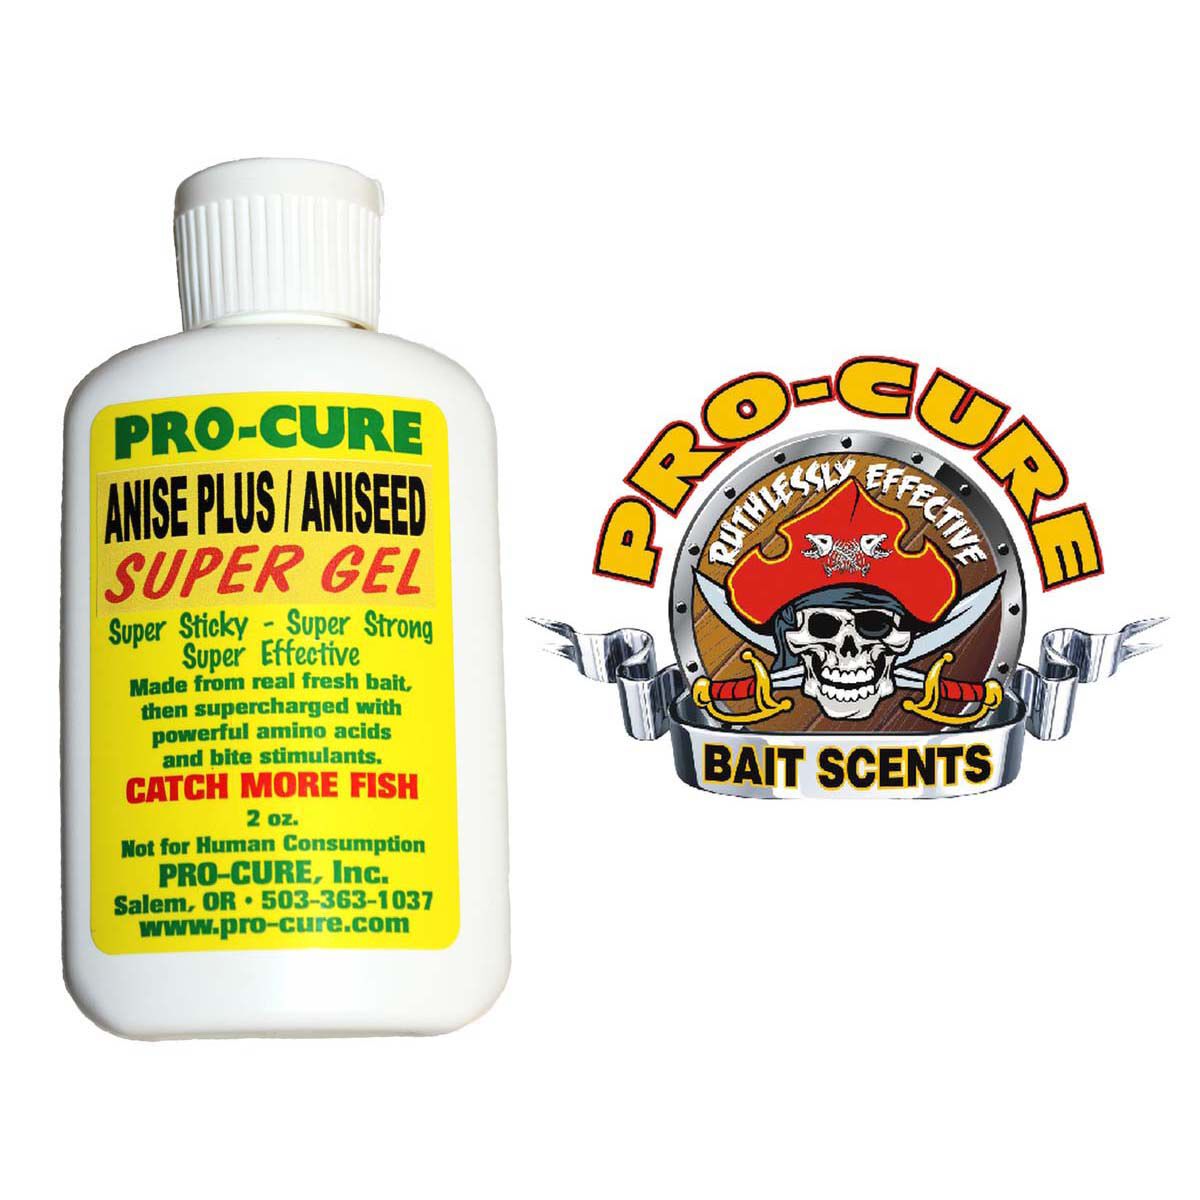 Pro-Cure Bait Scent: How Many More Fish Does It Really Catch? Fun